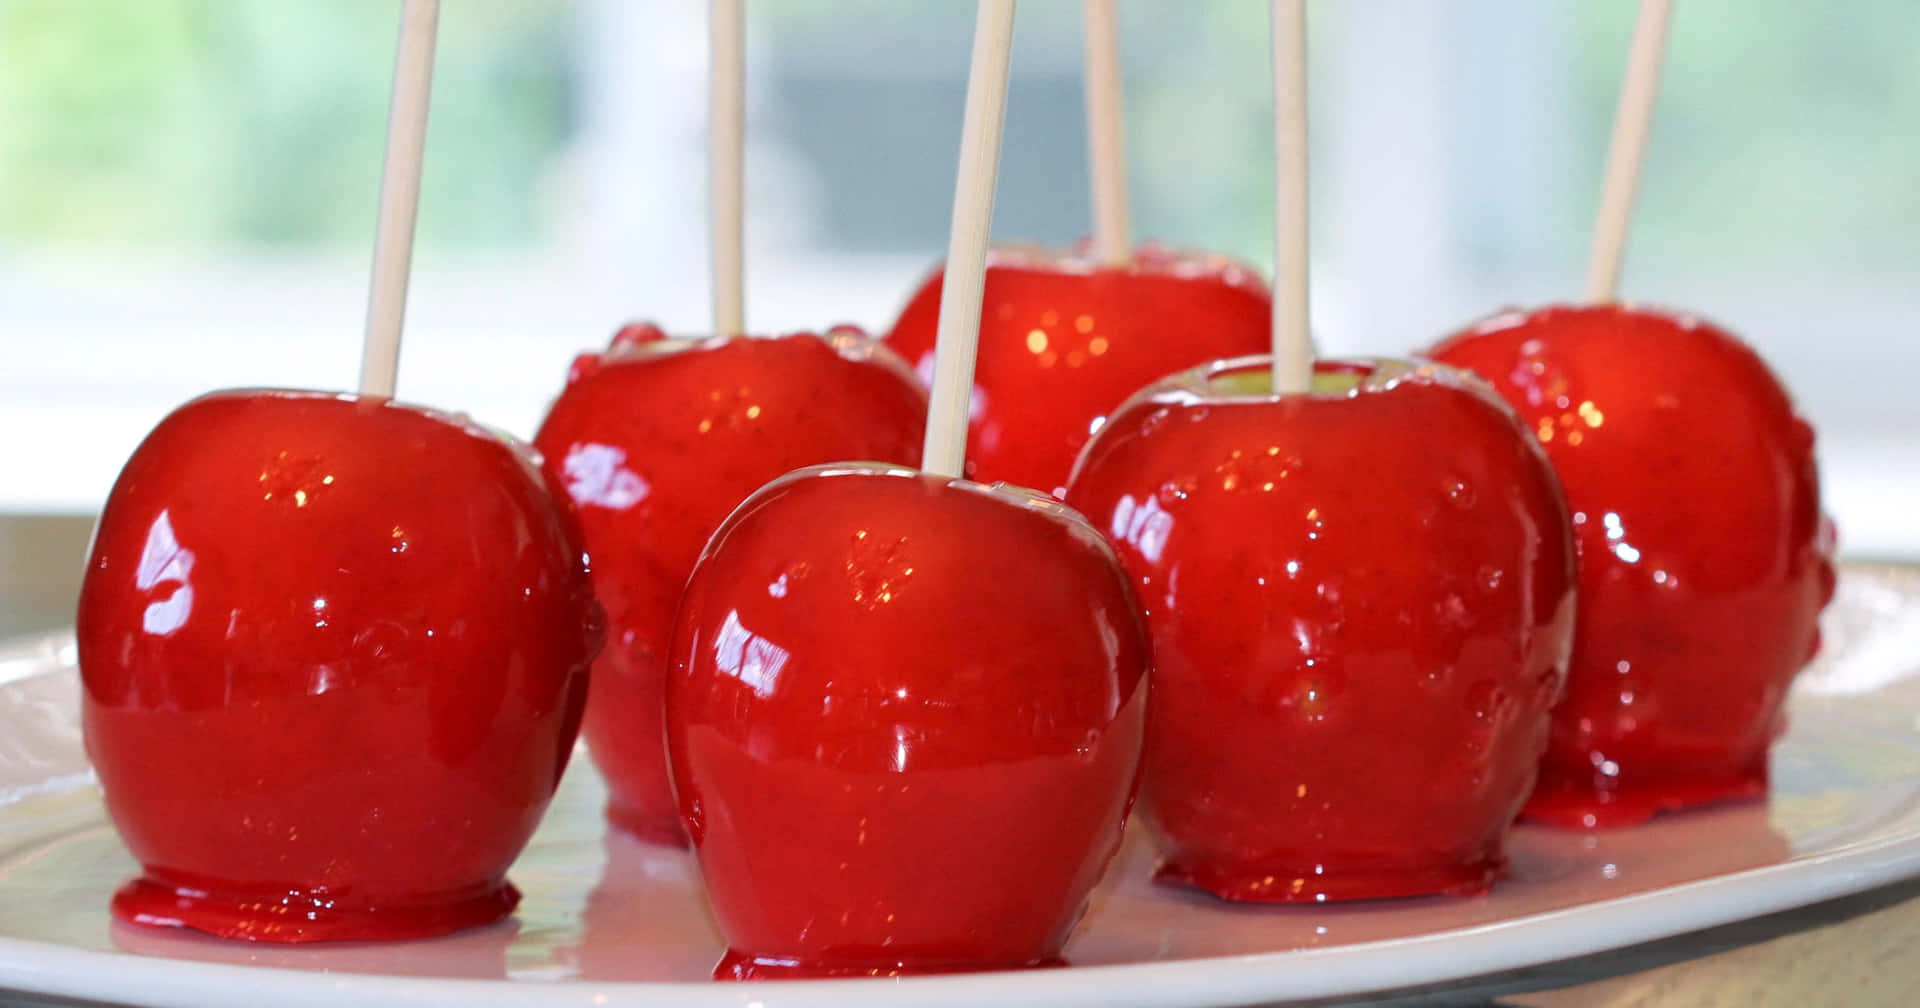 Delicious and Colorful Candy Apples Wallpaper